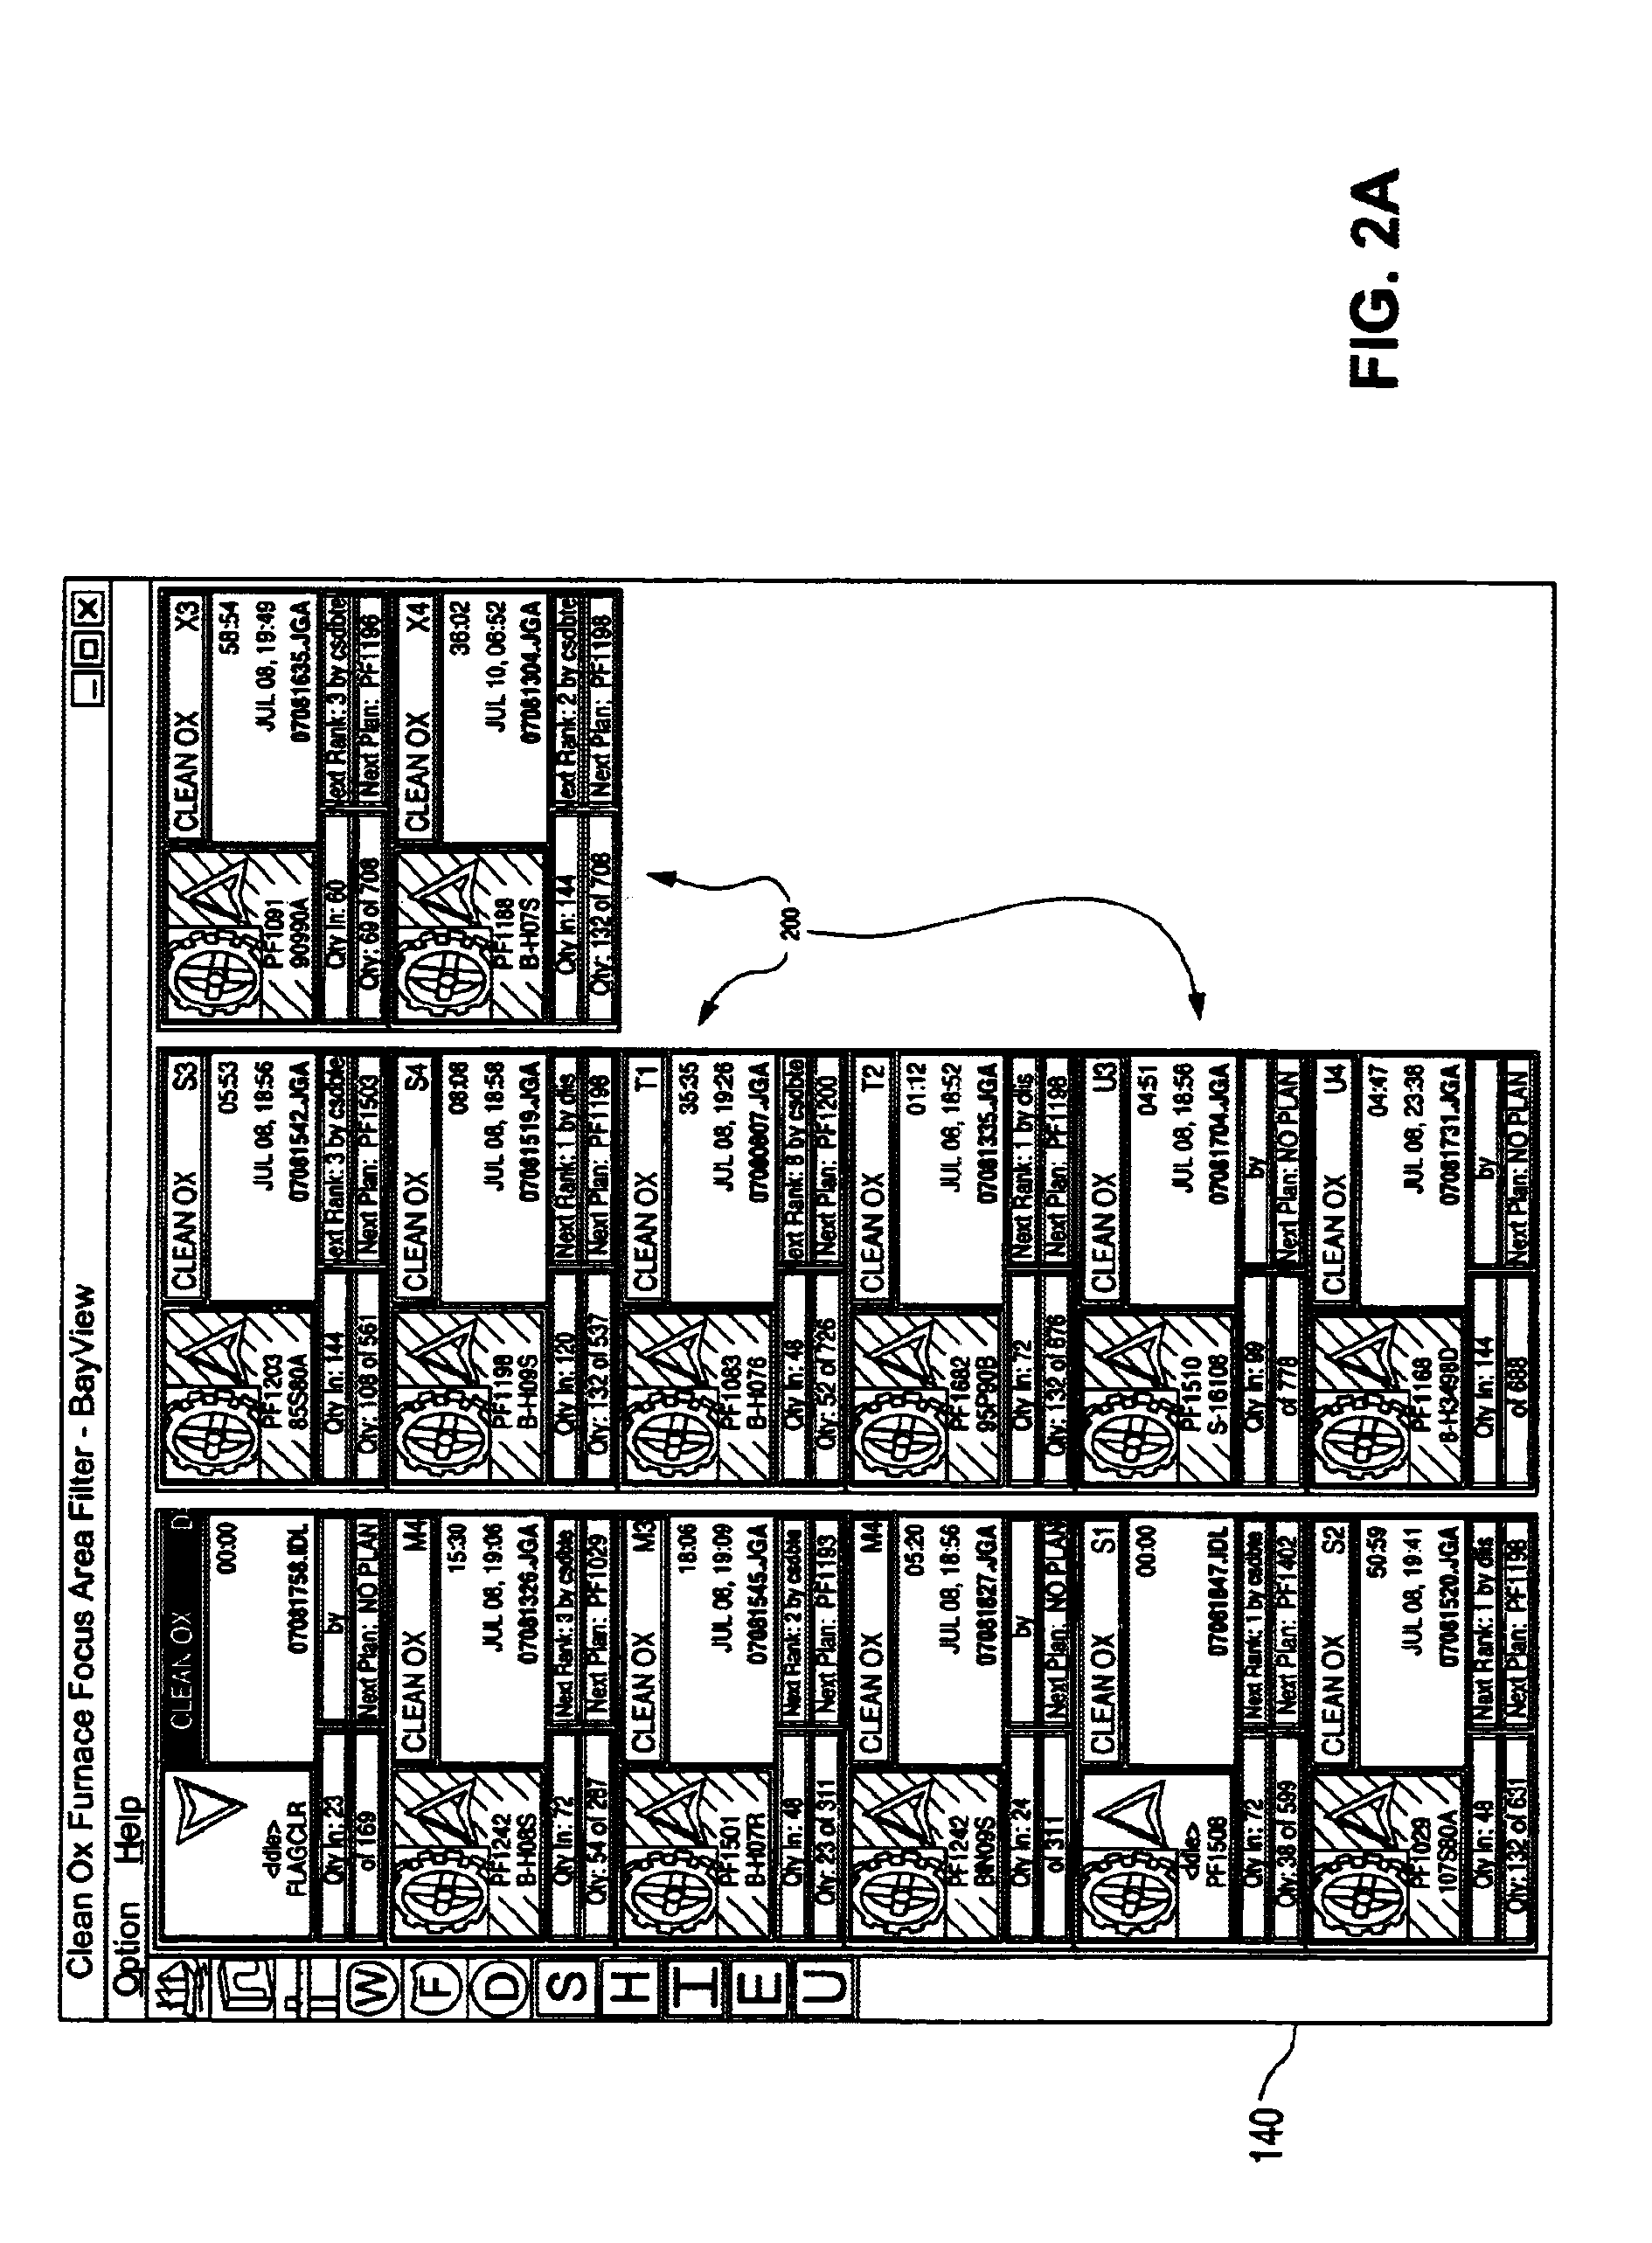 Graphical user interface for allocating multi-function resources in semiconductor wafer fabrication and method of operation